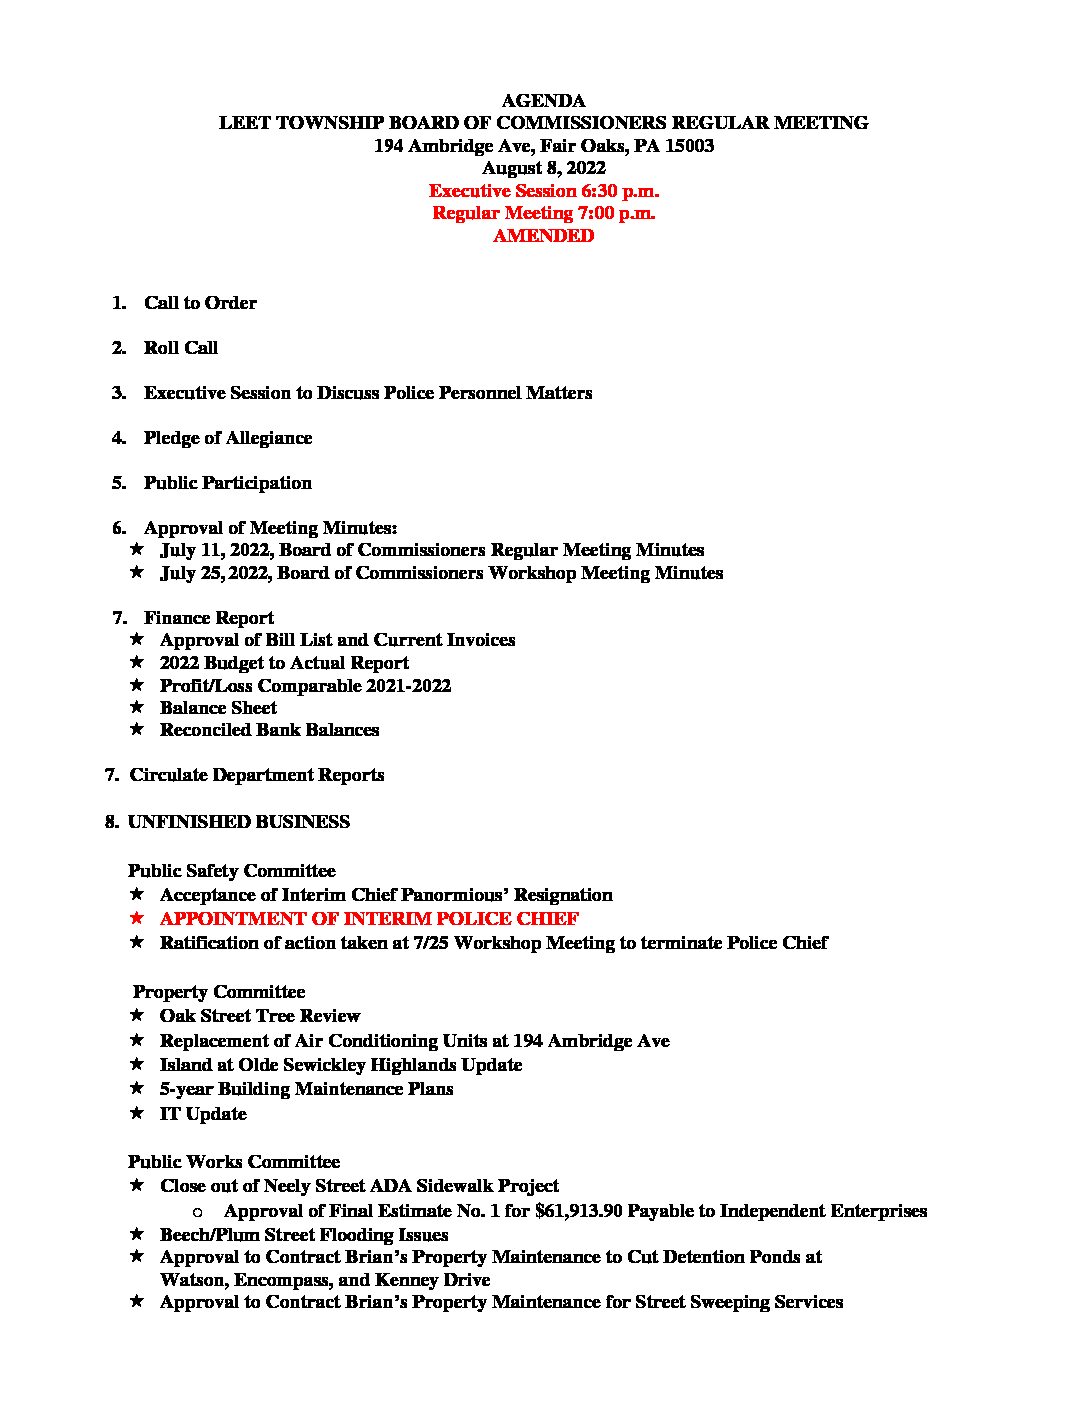 Amended AGENDA August 8, 2022, Board of Commissioners Regular Meeting